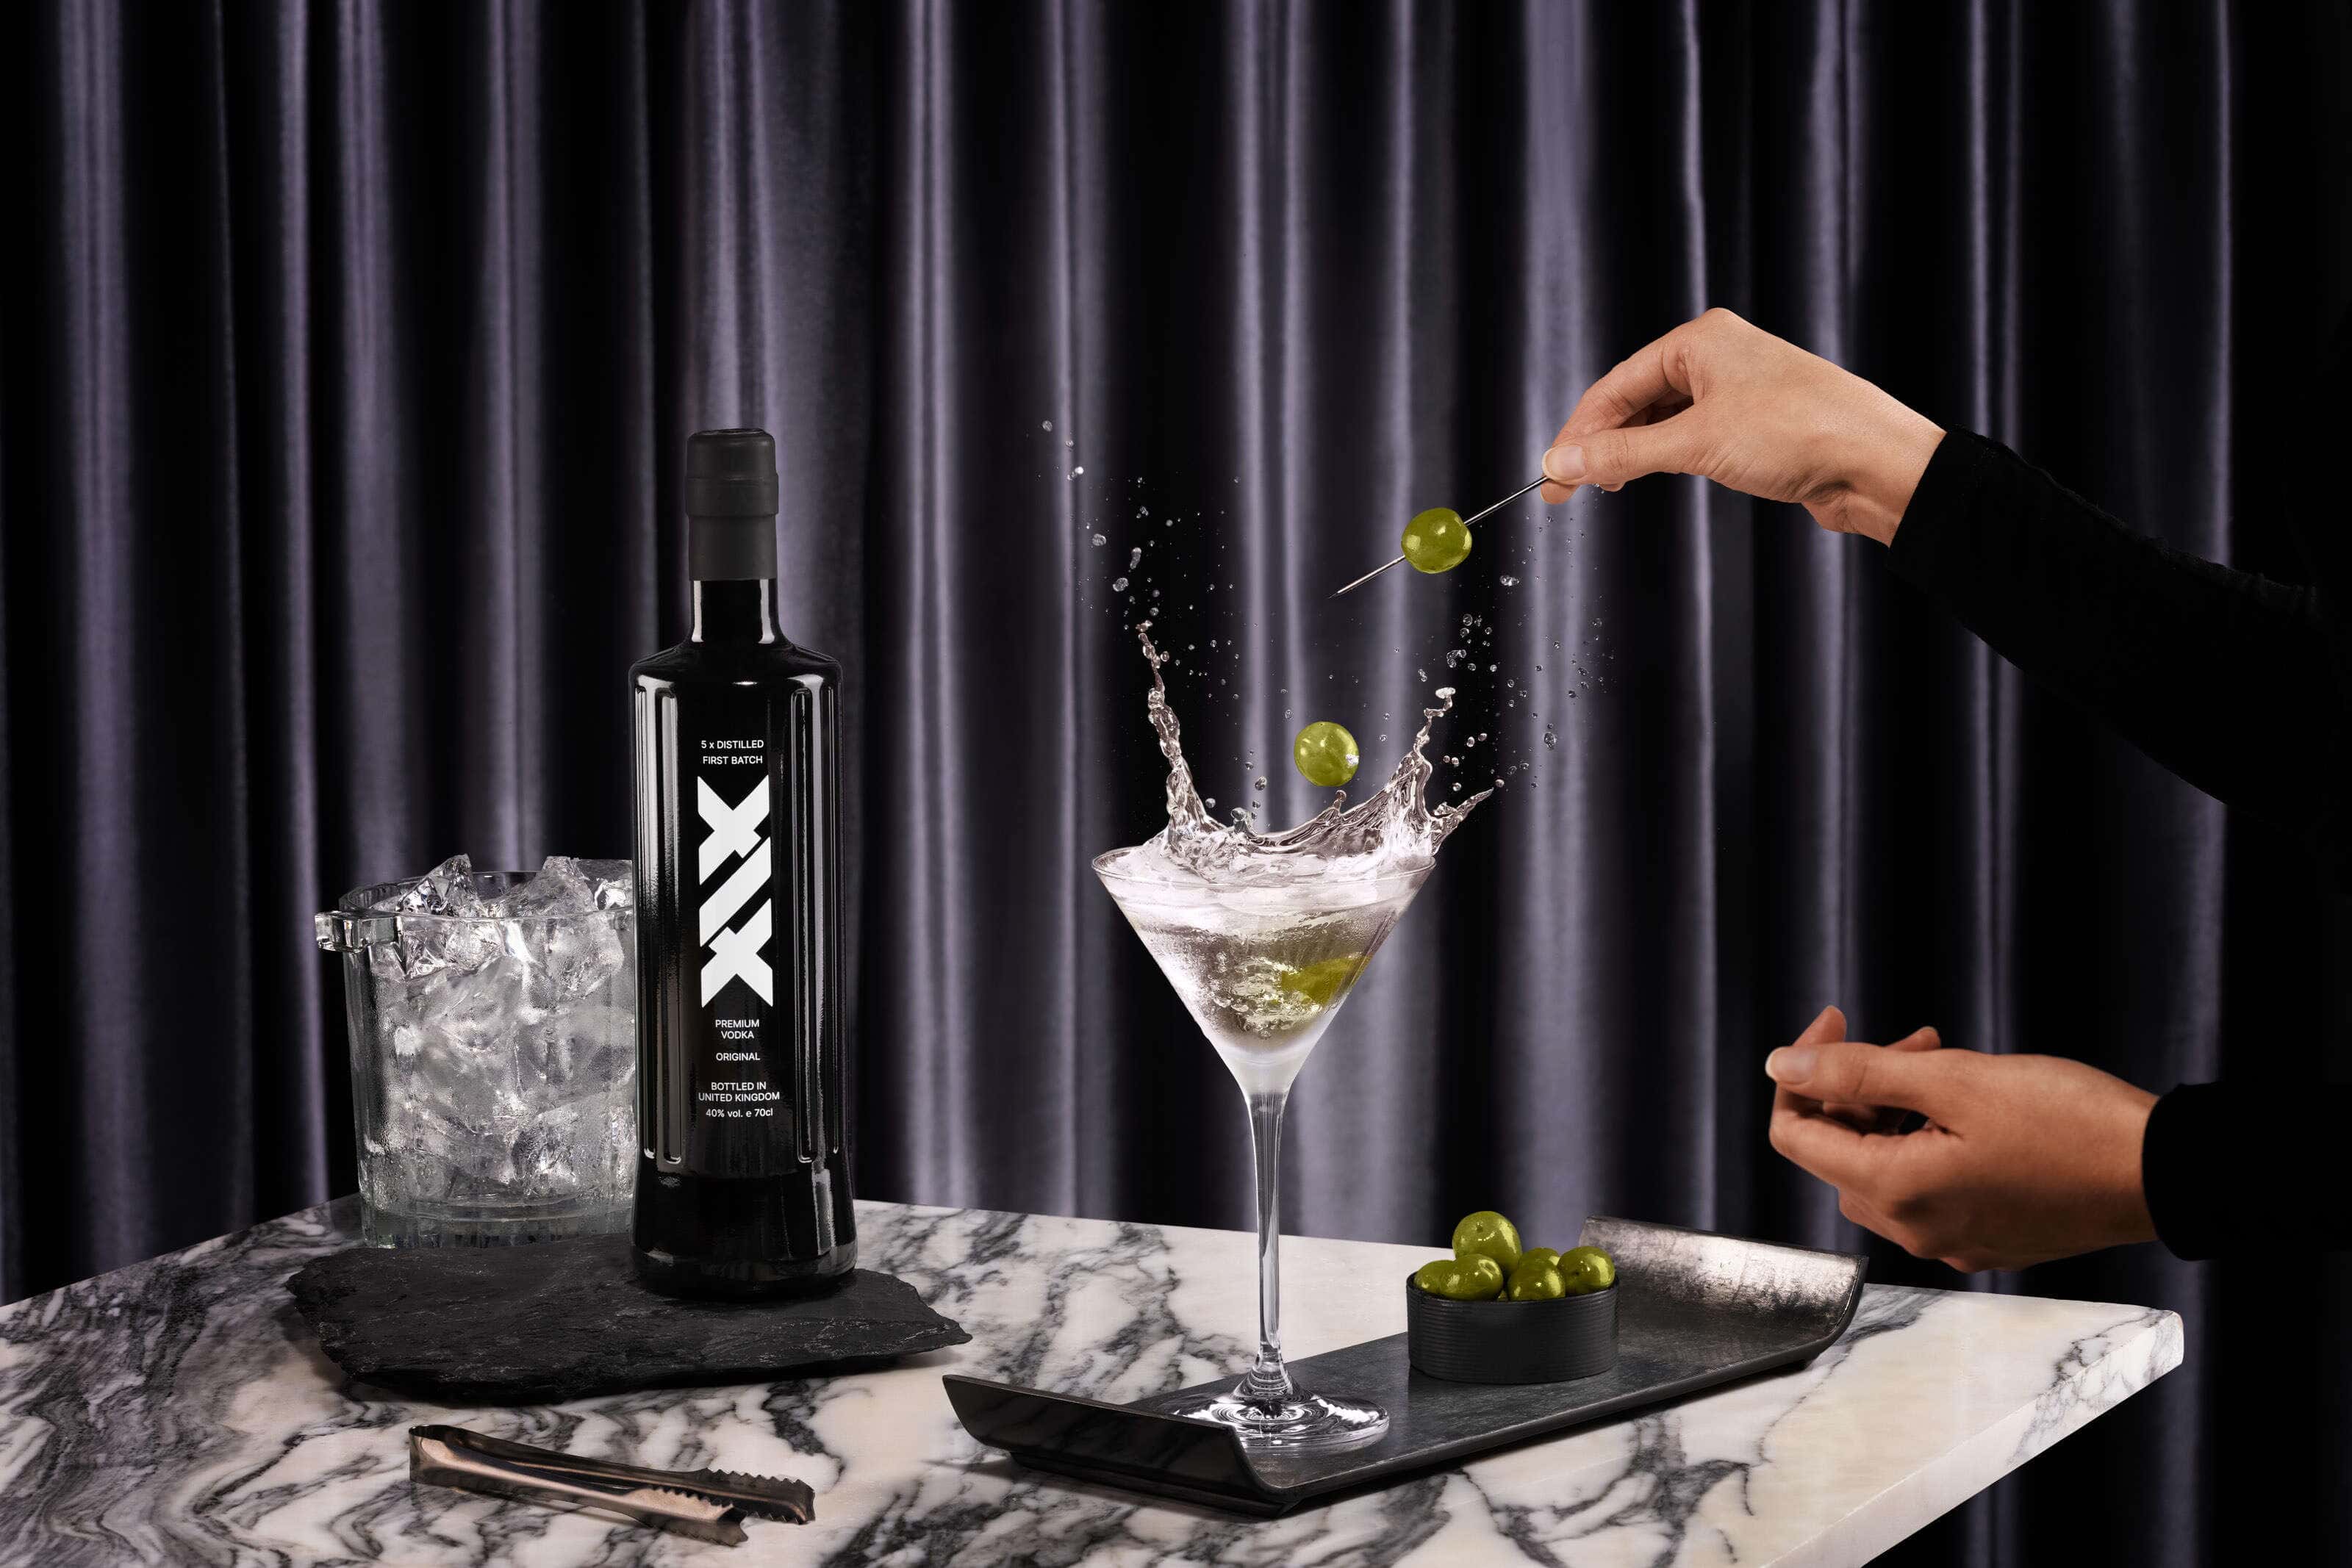 xix vodka martini with olives splashing into the drink